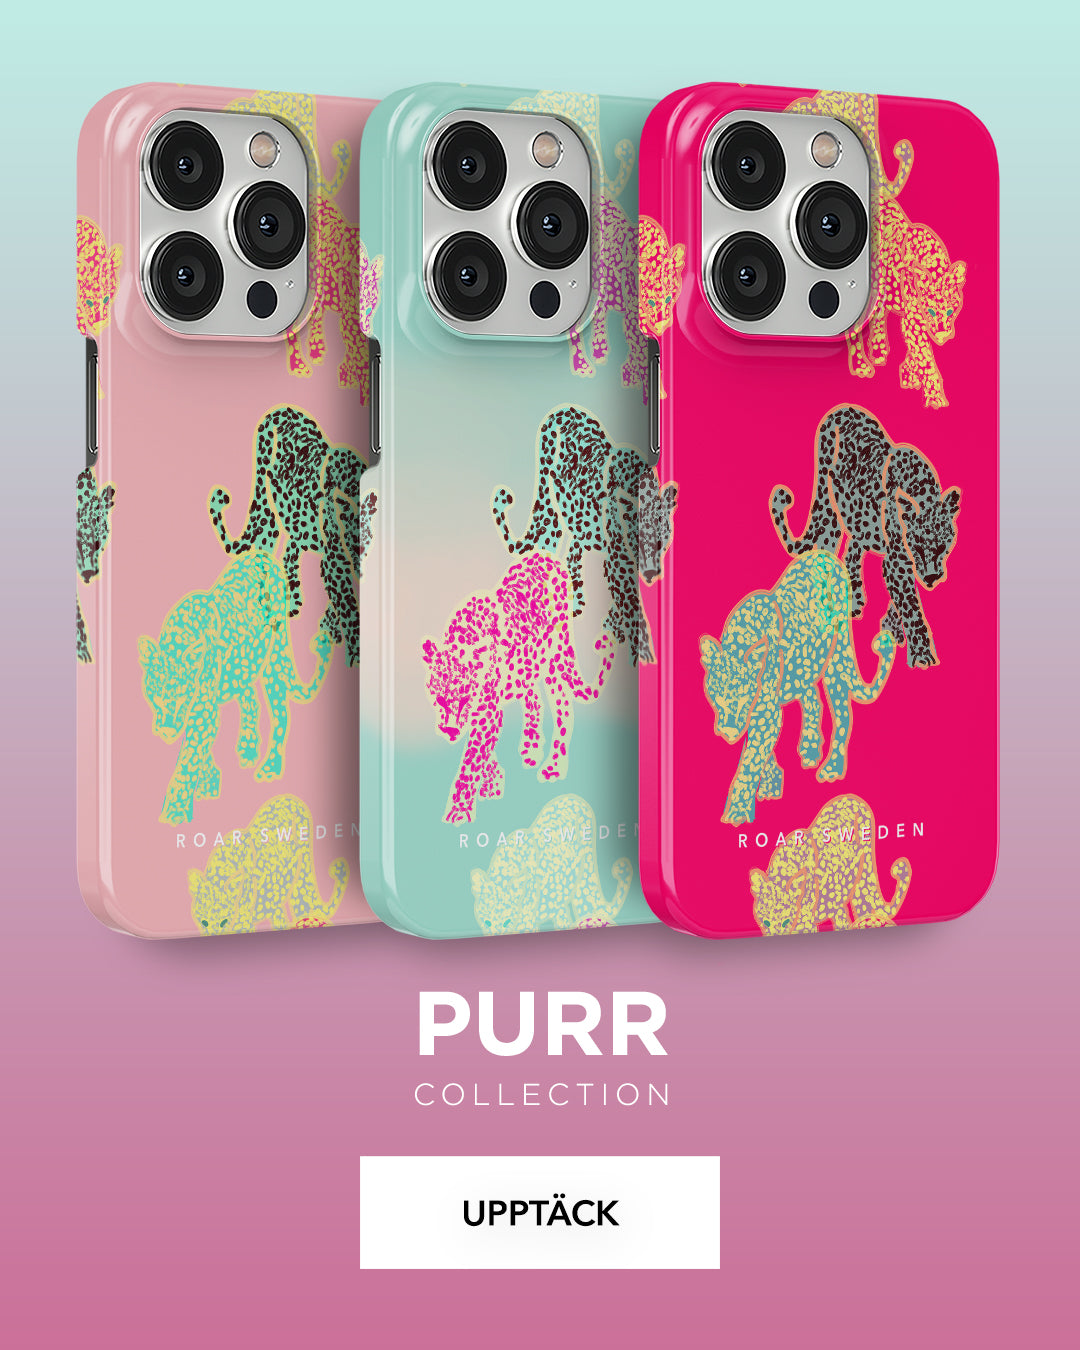 Purr - Collection